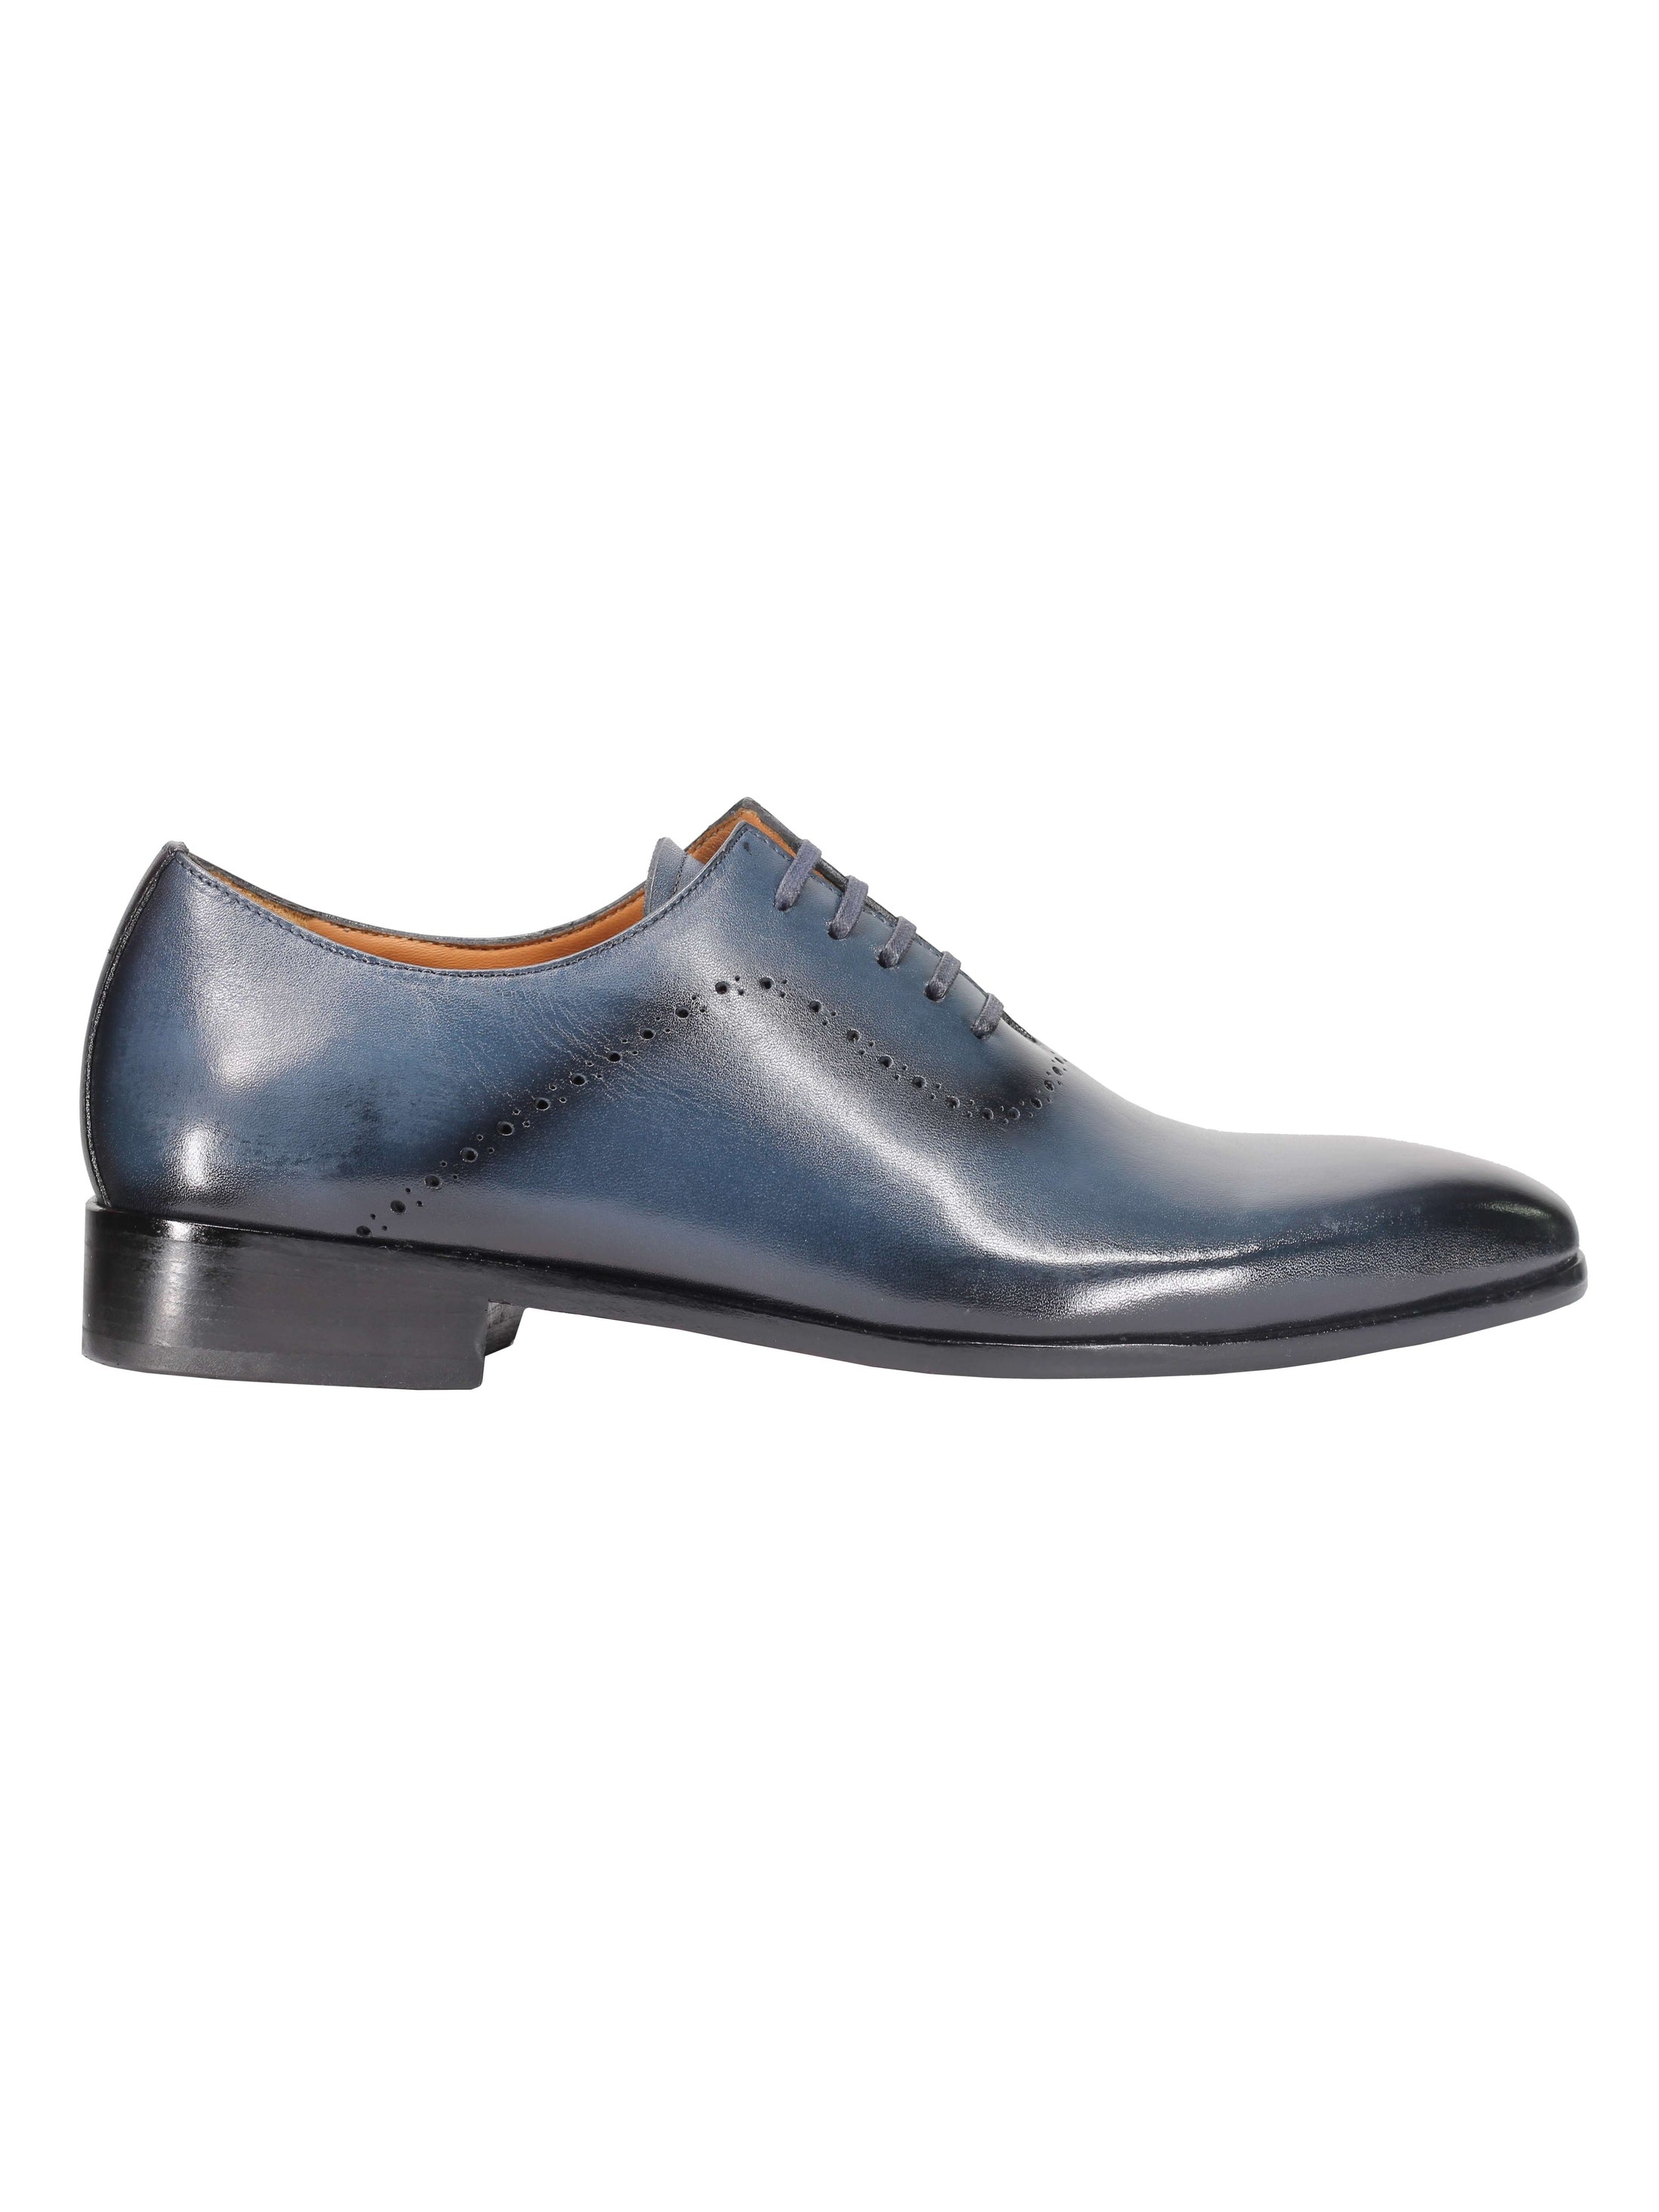 BLUE CALF LEATHER OXFORD LACE UP BROGUE SHOES – XPOSED